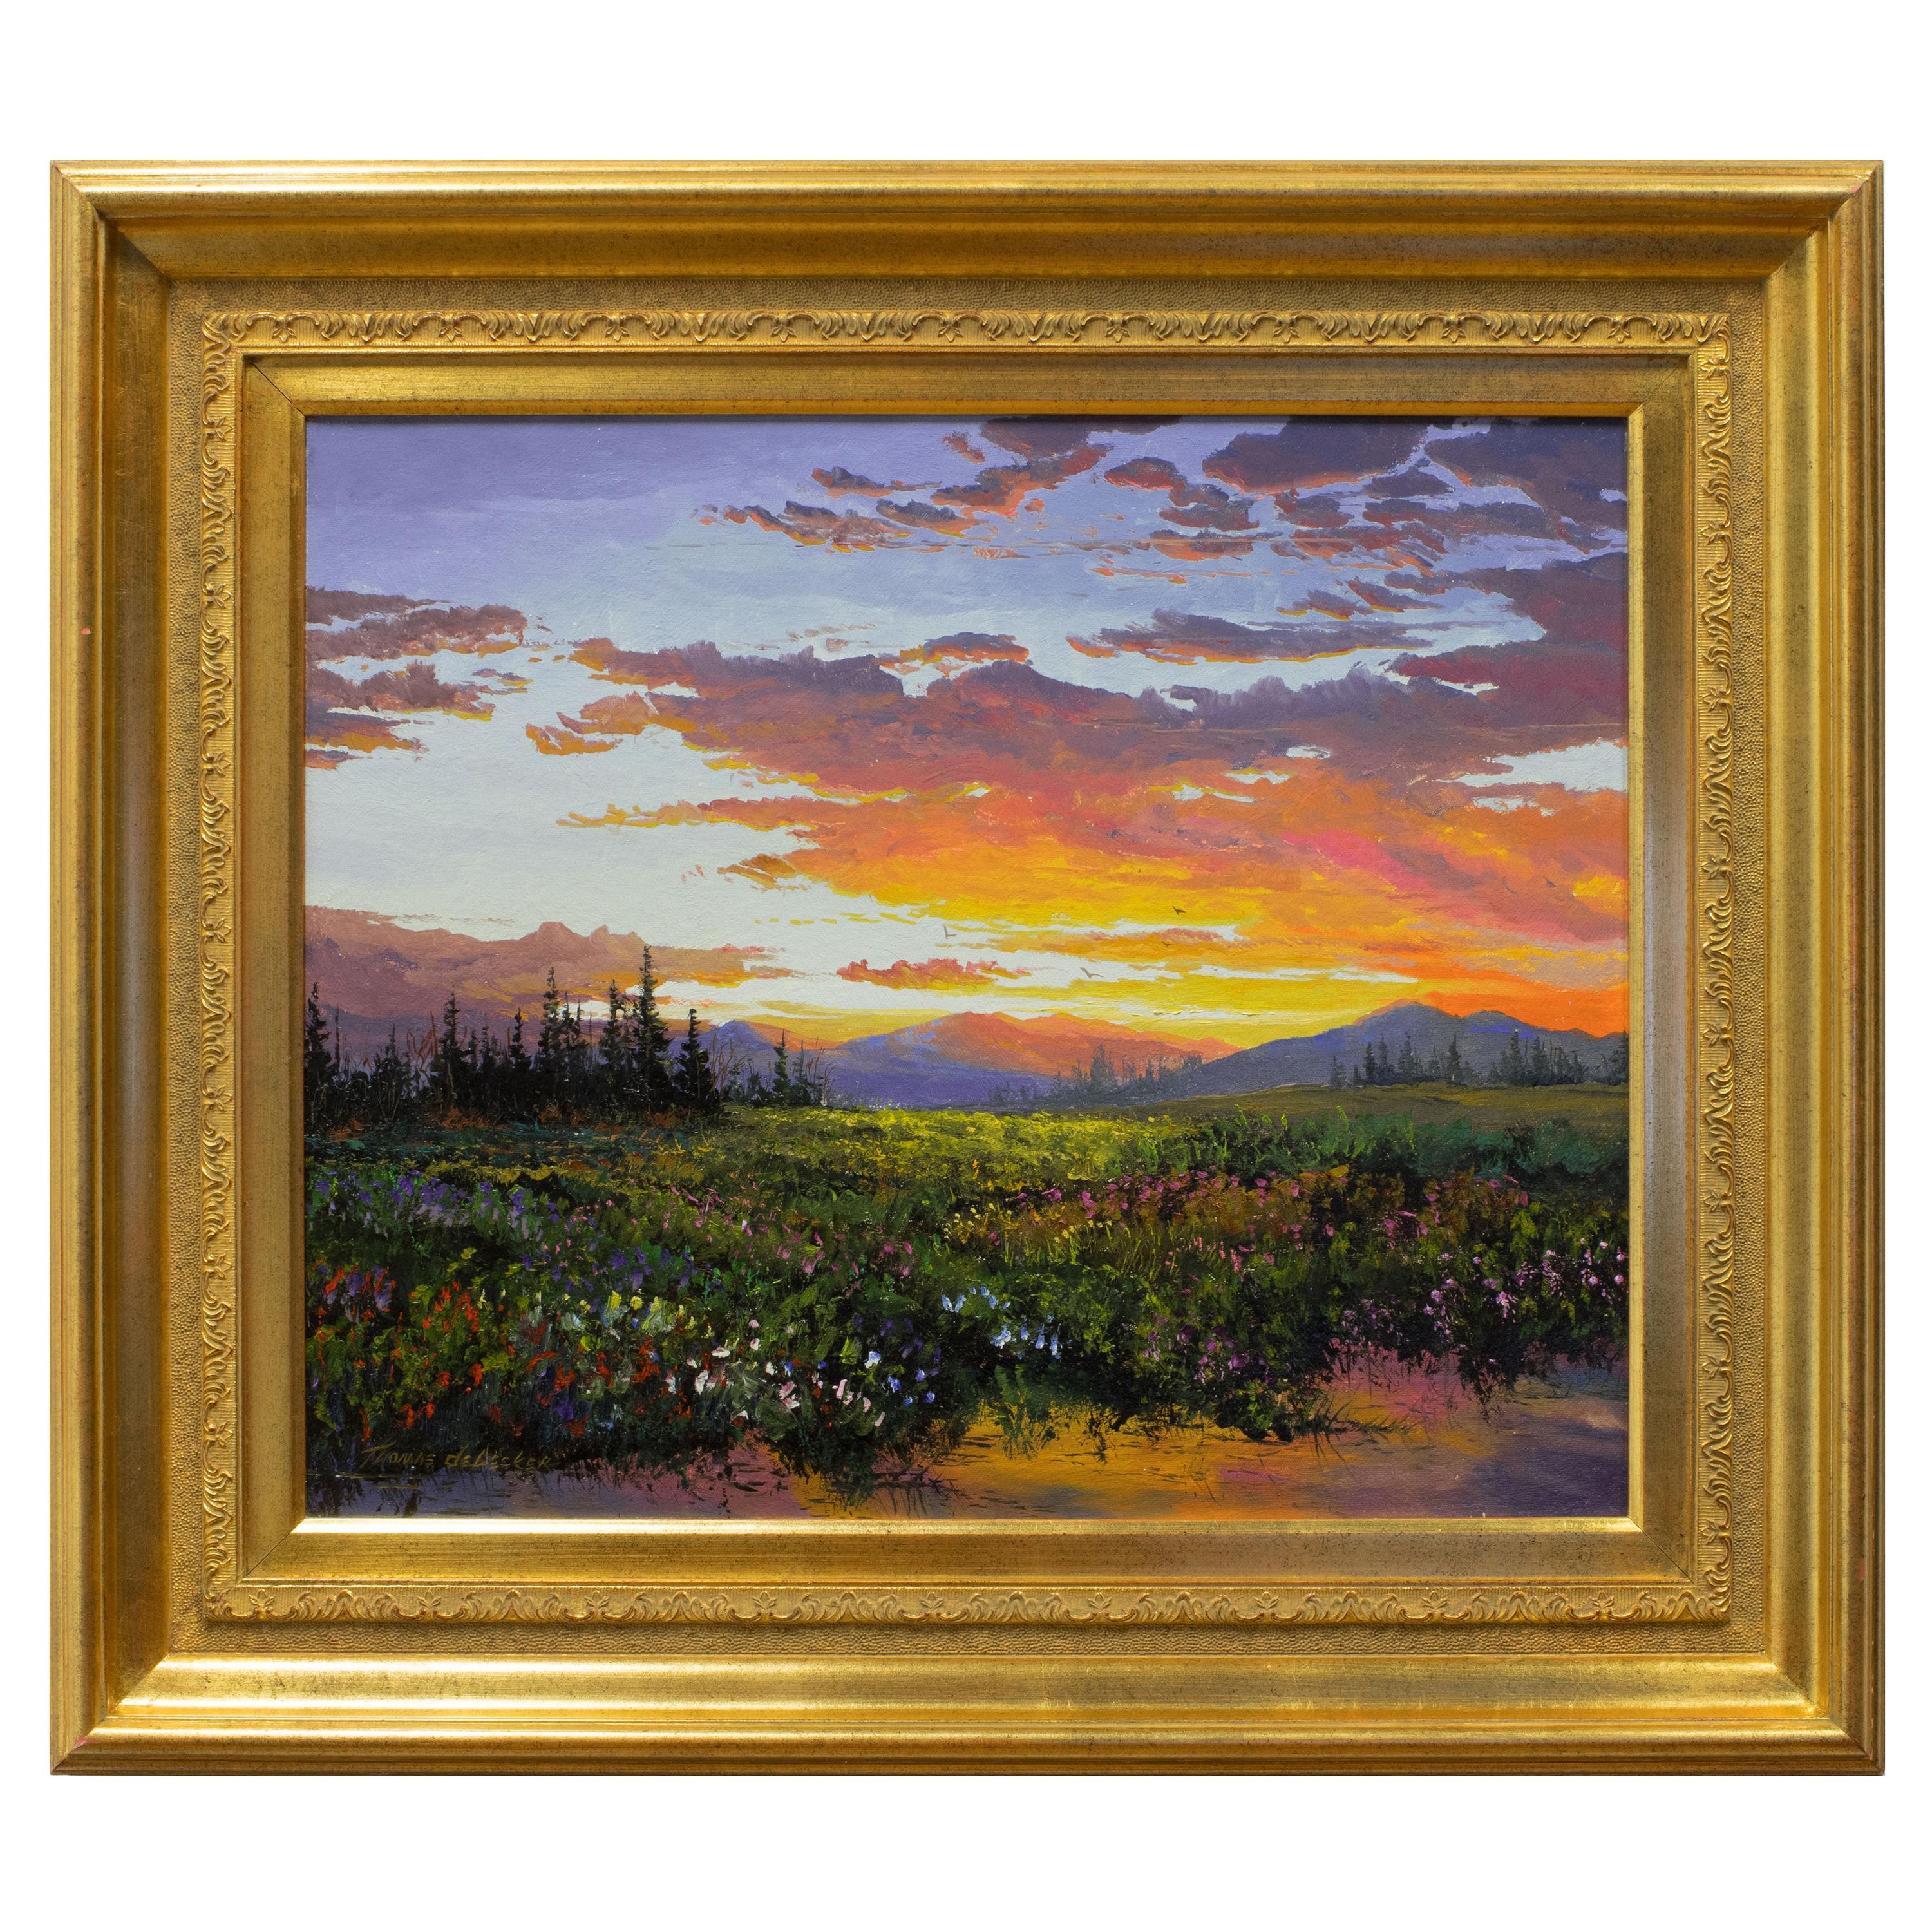 Original Painting "Sunset and Flowers - Summer" by Thomas deDecker For Sale